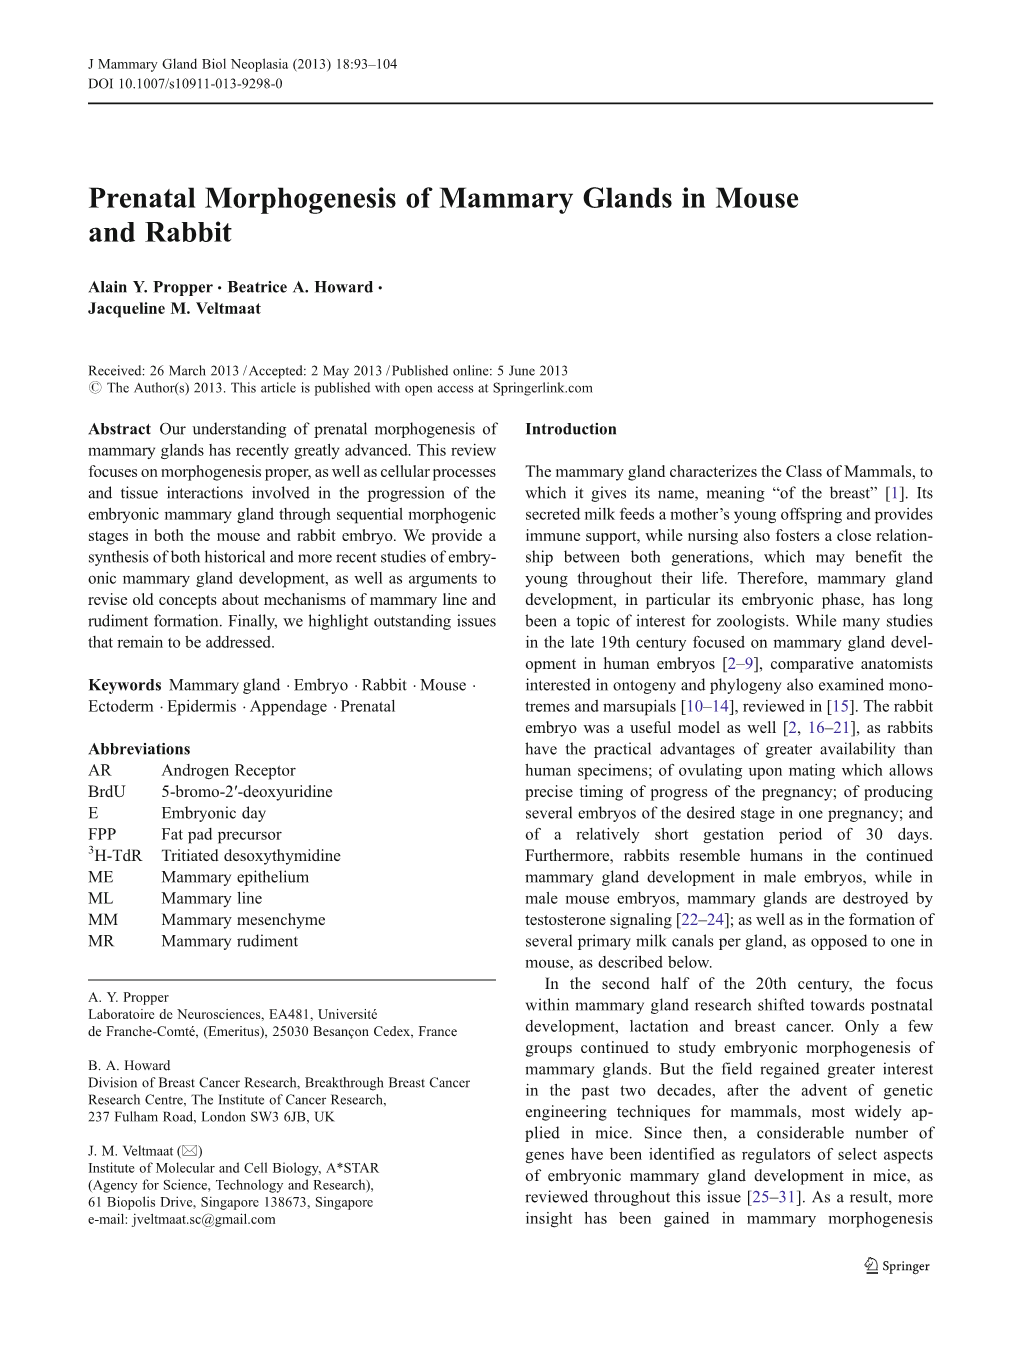 Prenatal Morphogenesis of Mammary Glands in Mouse and Rabbit